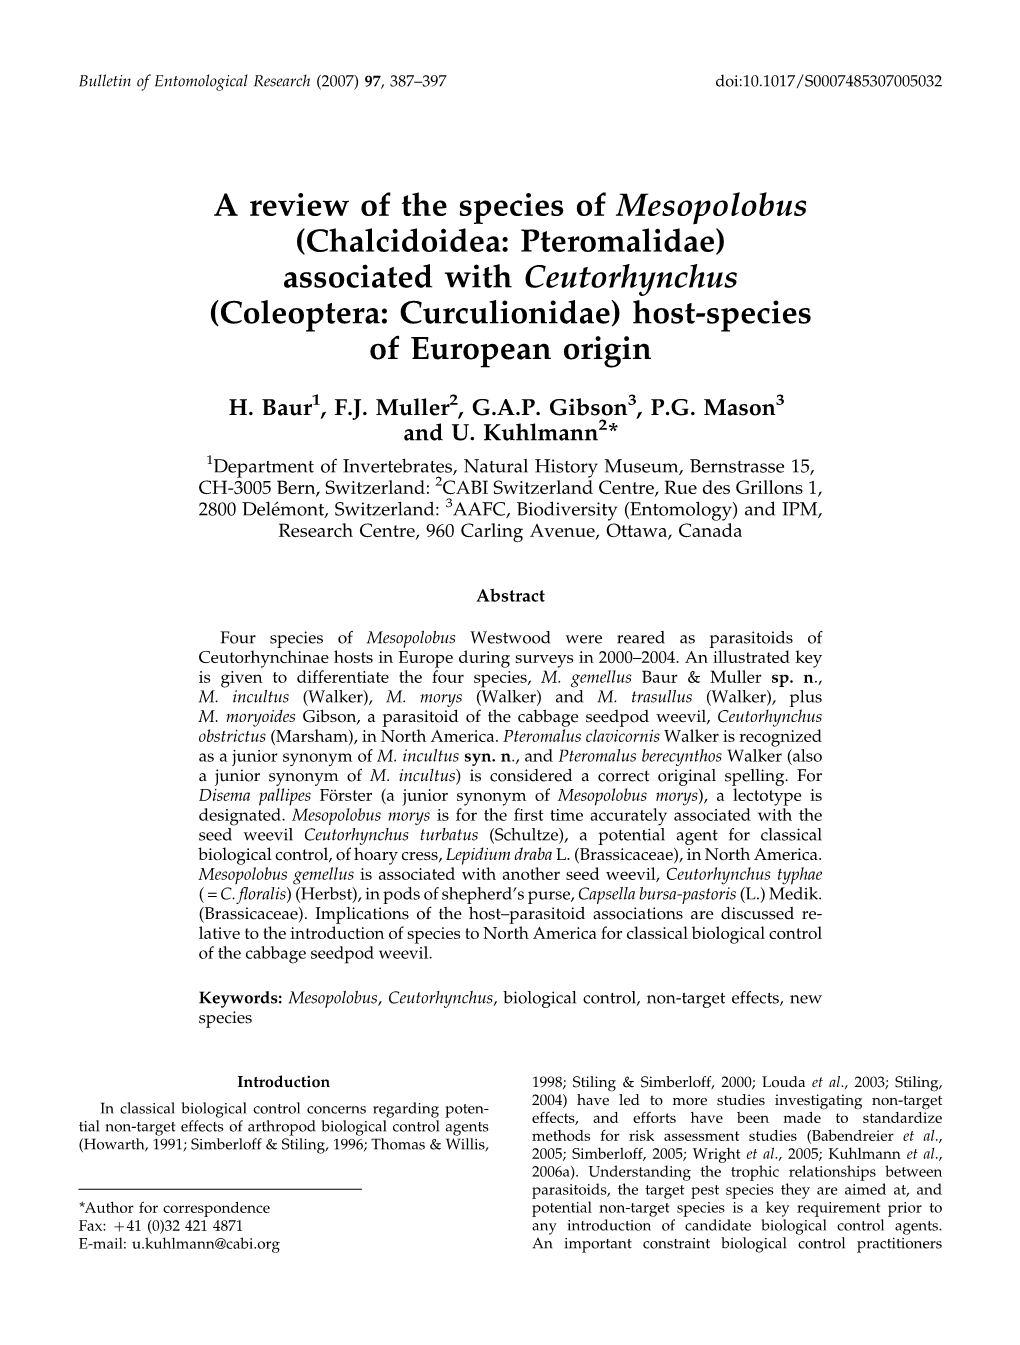 A Review of the Species of Mesopolobus (Chalcidoidea: Pteromalidae) Associated with Ceutorhynchus (Coleoptera: Curculionidae) Host-Species of European Origin